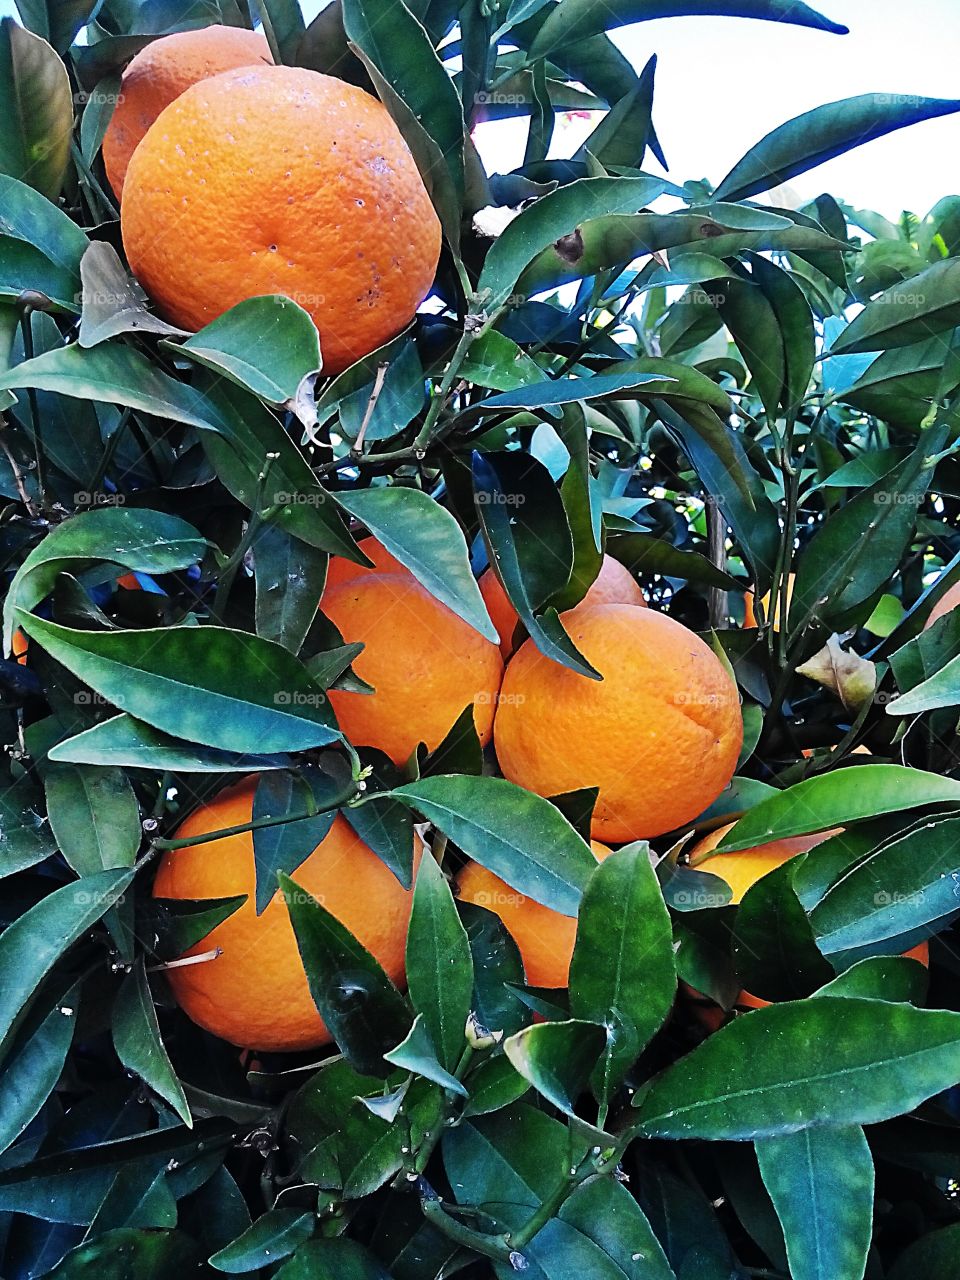 Orange tree in my garden . Fresh and juicy smiling to me every morning  ;) 